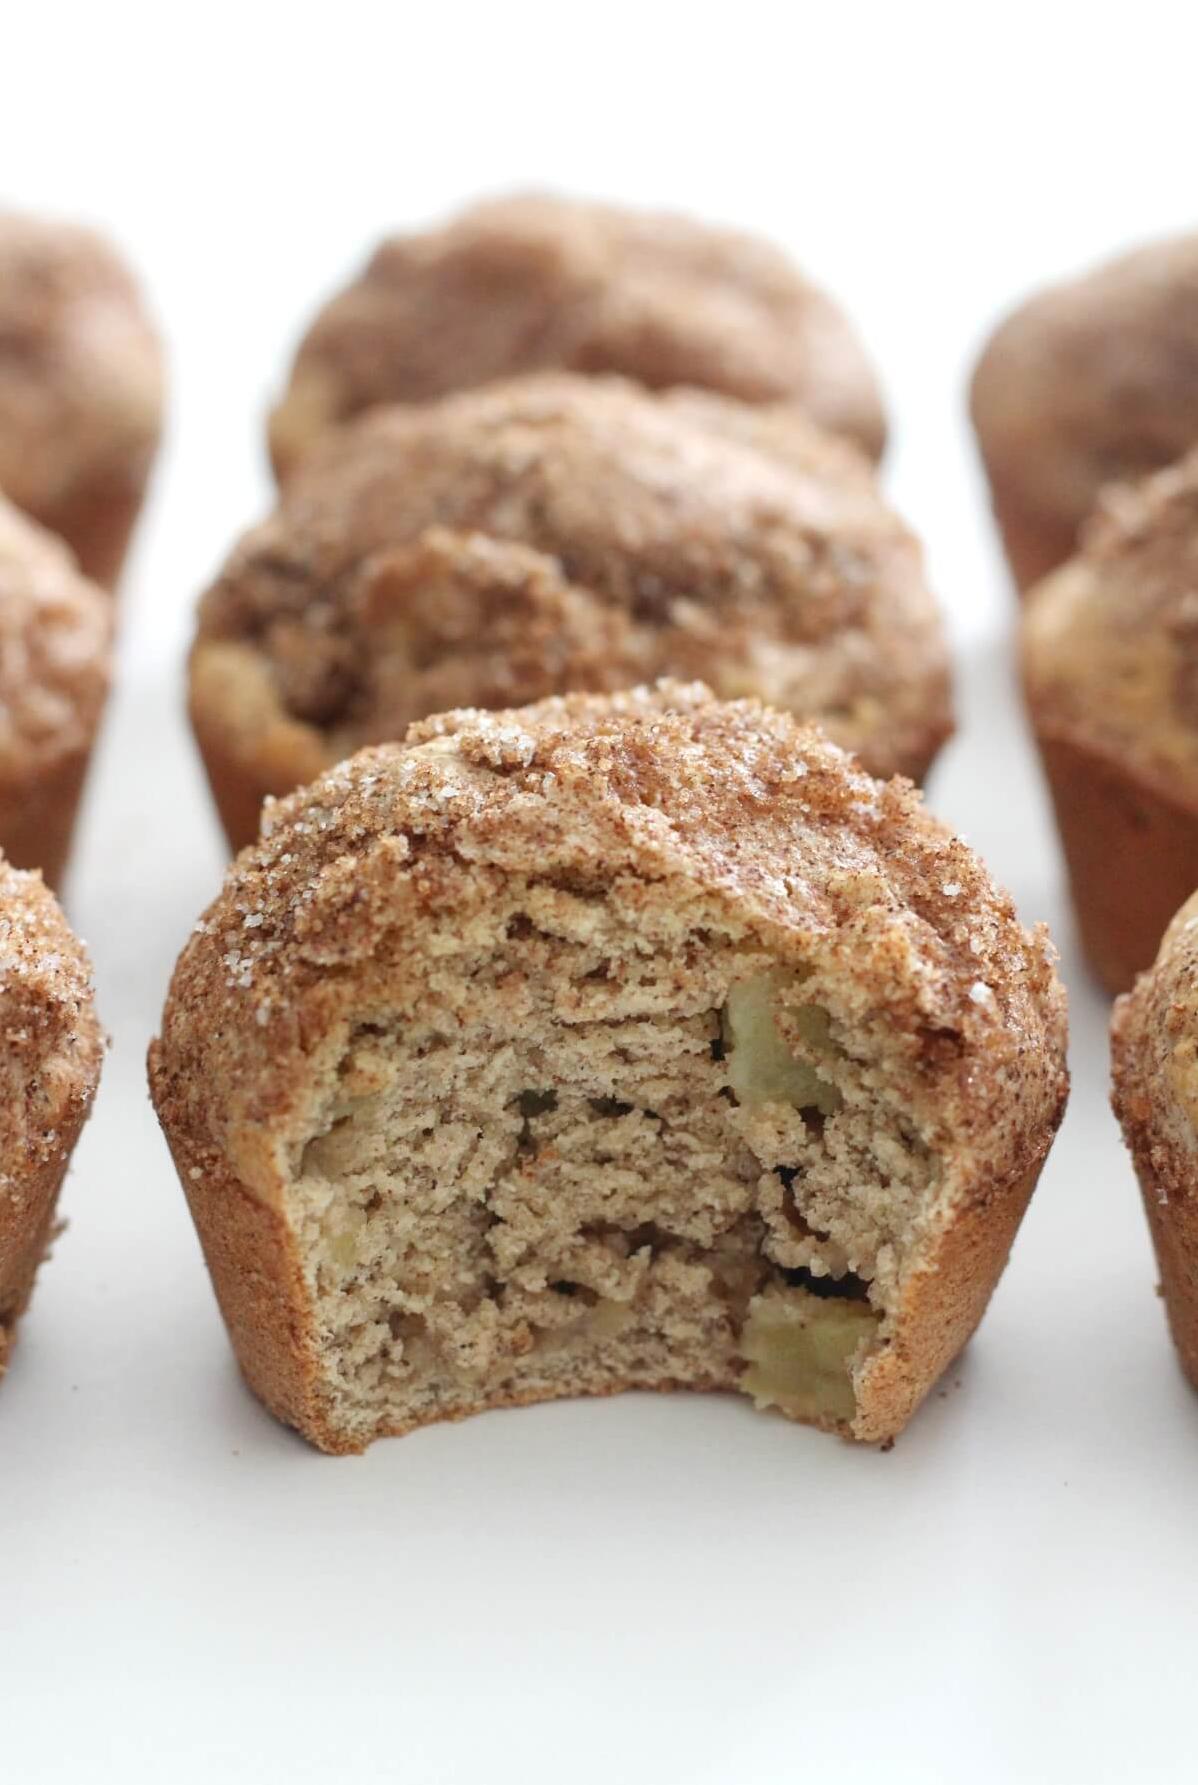  Bite into these muffins and get lost in the perfect balance of flavors